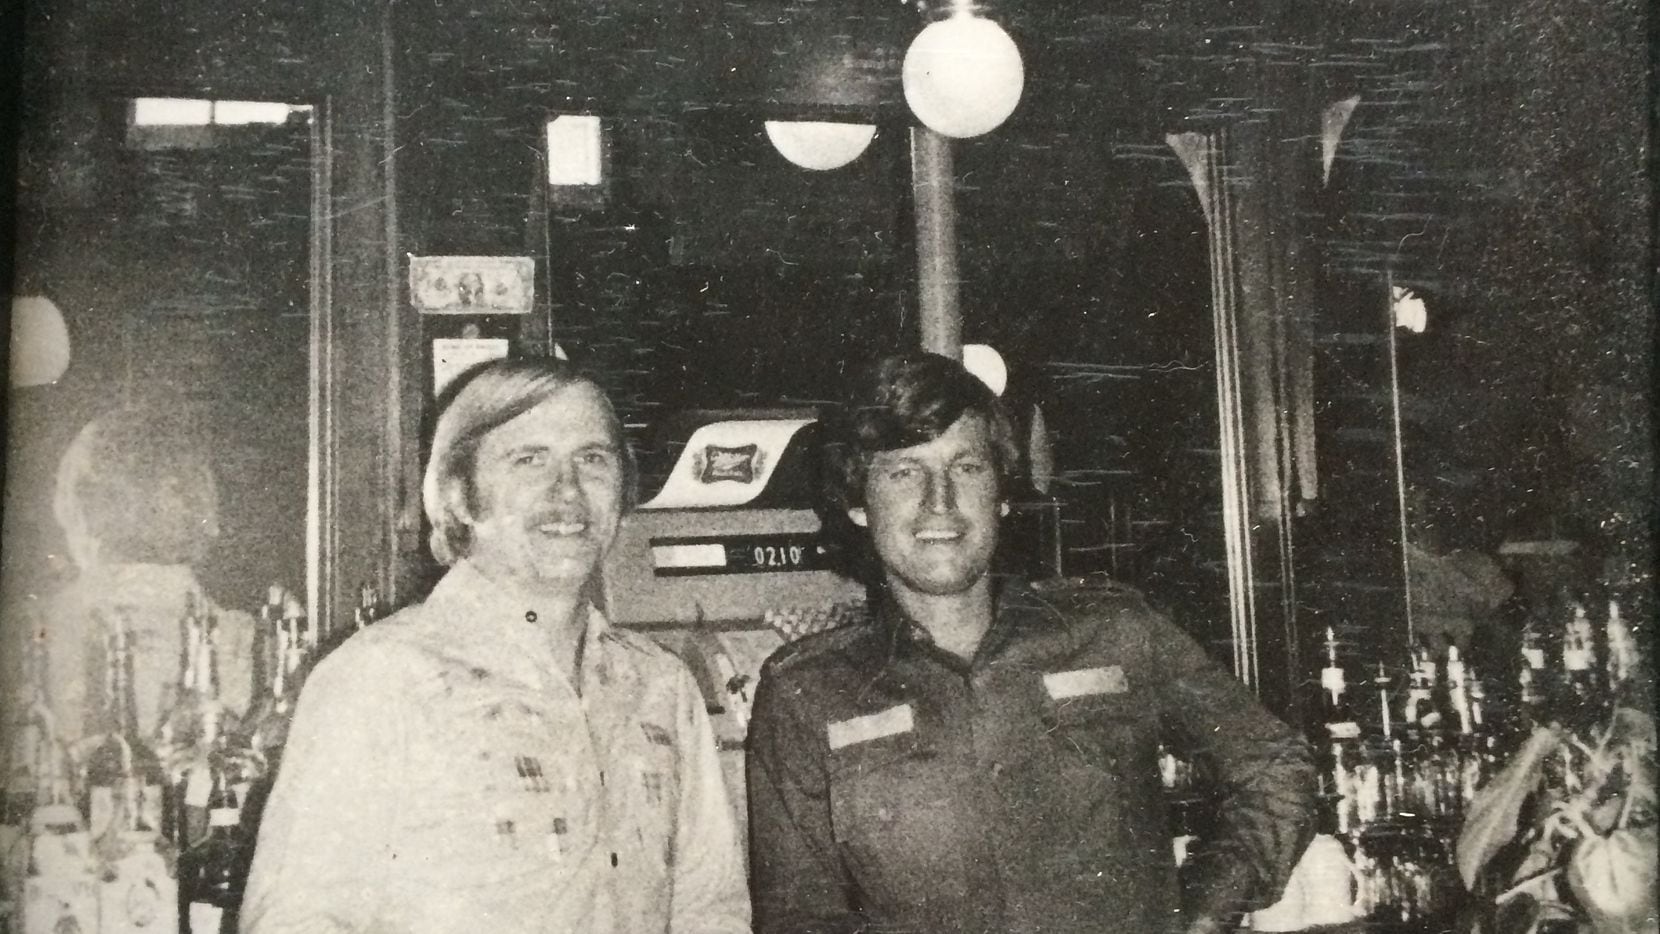 Phil Cobb and Gene Street's first business venture together was J. Alfred's, a bar that opened on Oak Lawn Avenue in Dallas in 1971. By 1975, they opened Black-Eyed Pea on Cedar Springs Road in Dallas (pictured). Over 50 years, the two bought and sold dozens of properties and opened and closed hundreds of restaurants and bars.